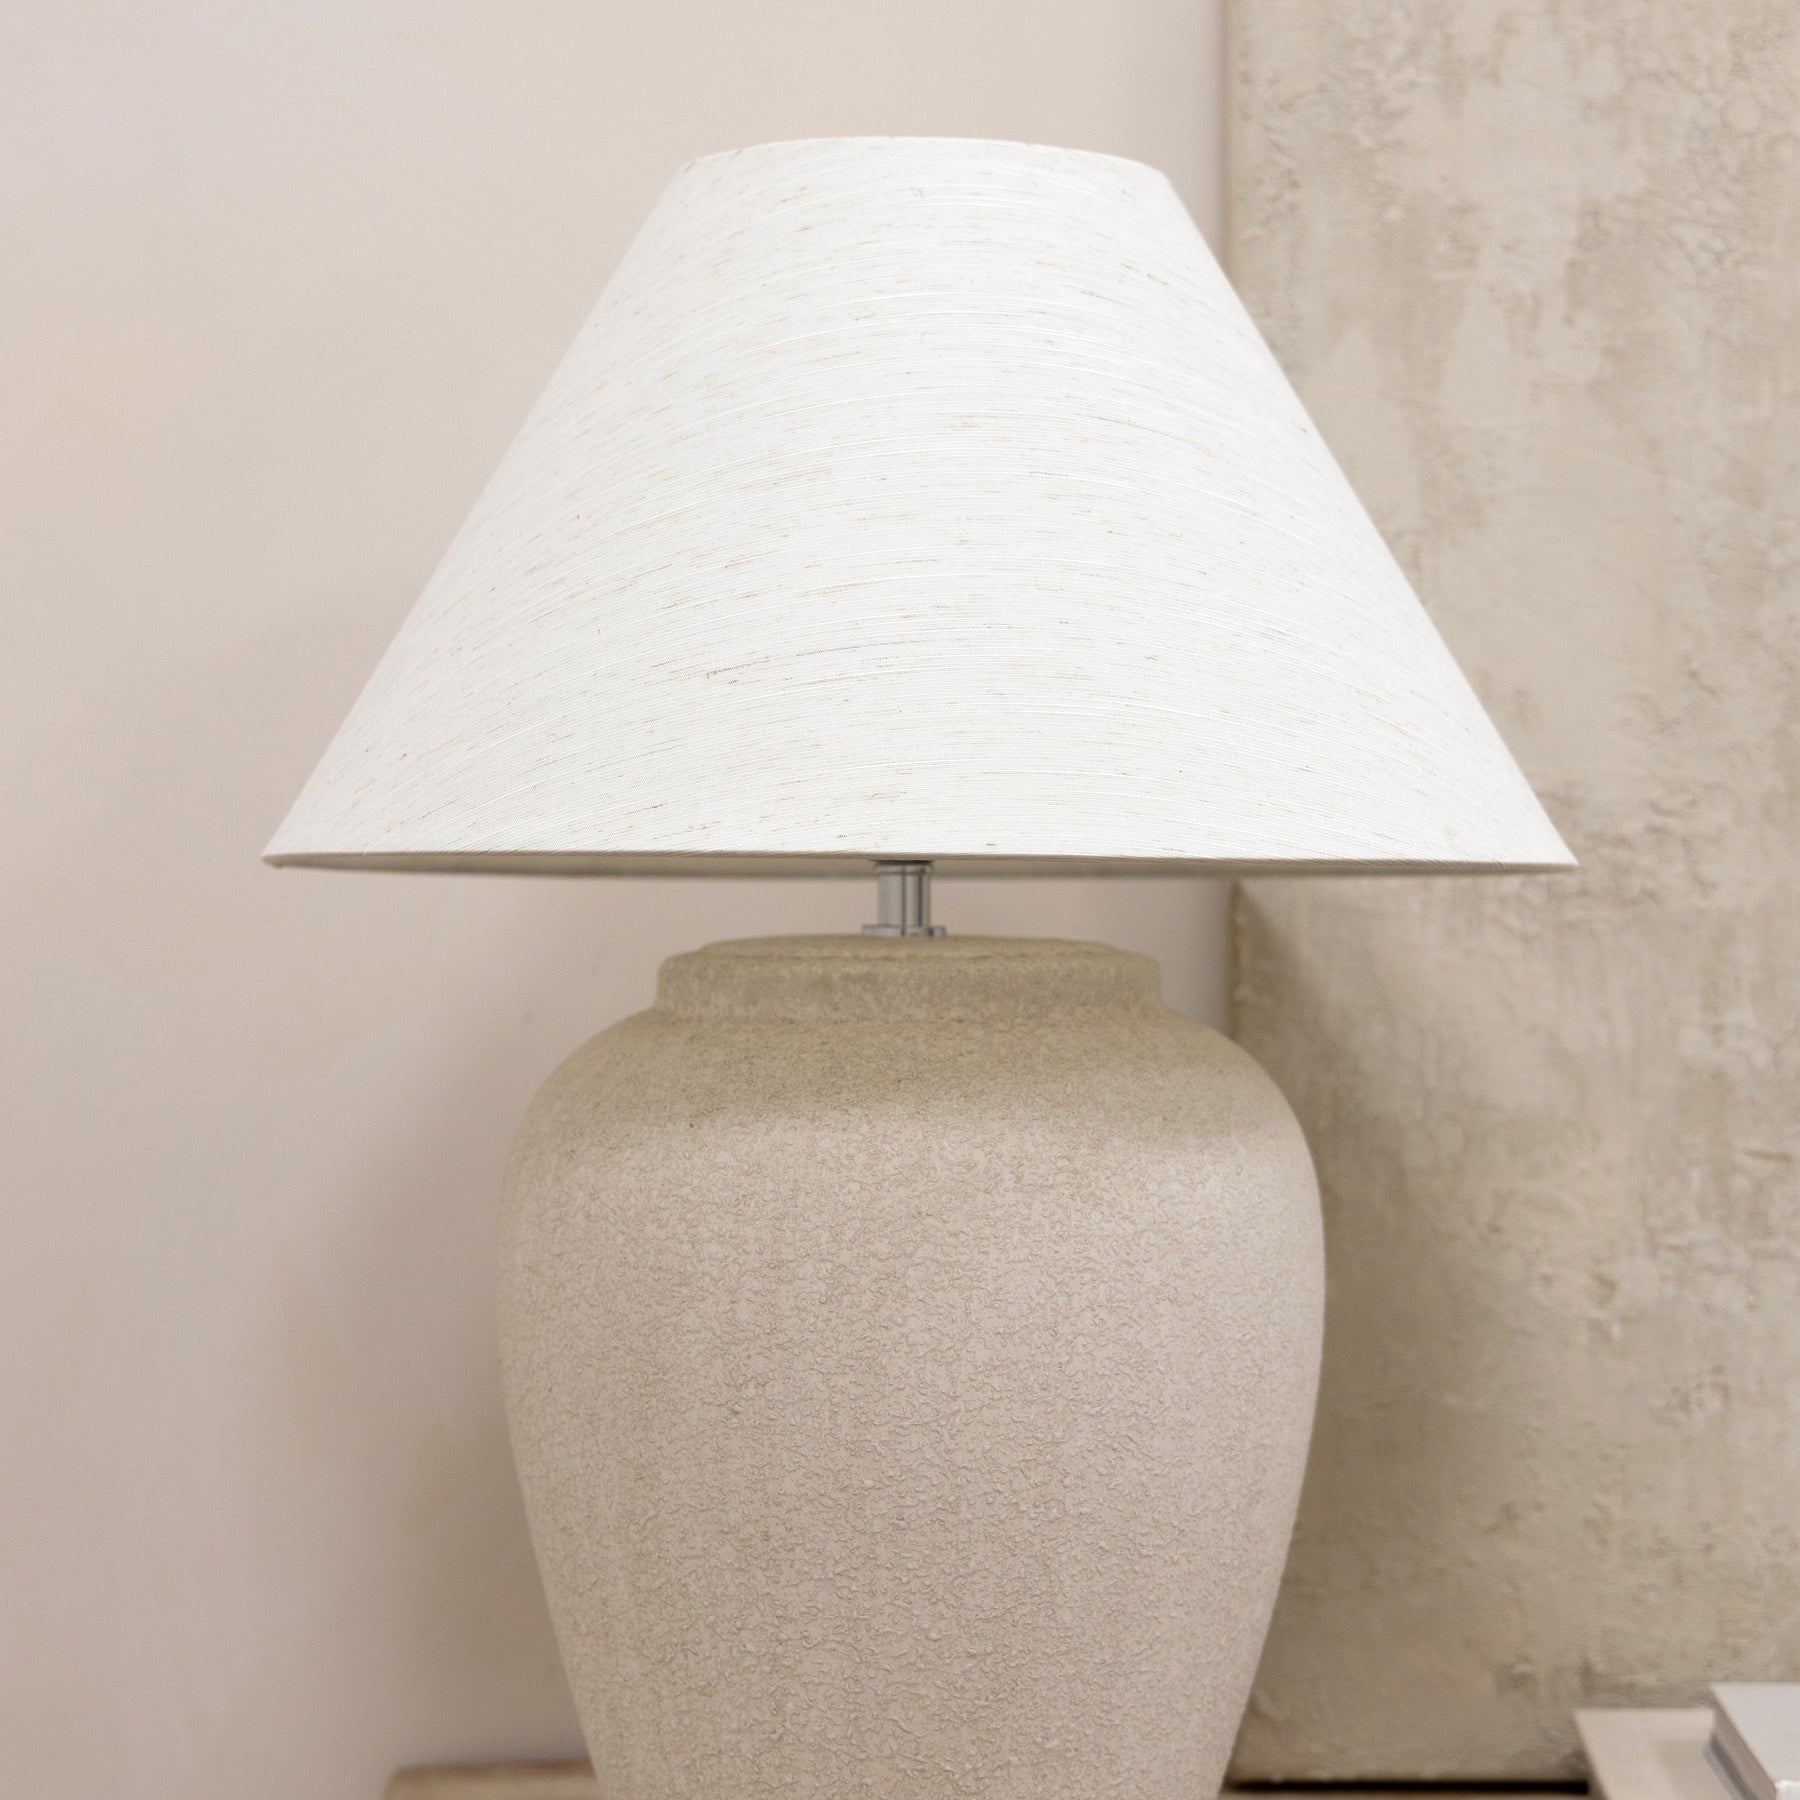 Detail shot of Stone Ceramic Coolie Shade Table Lamp - off